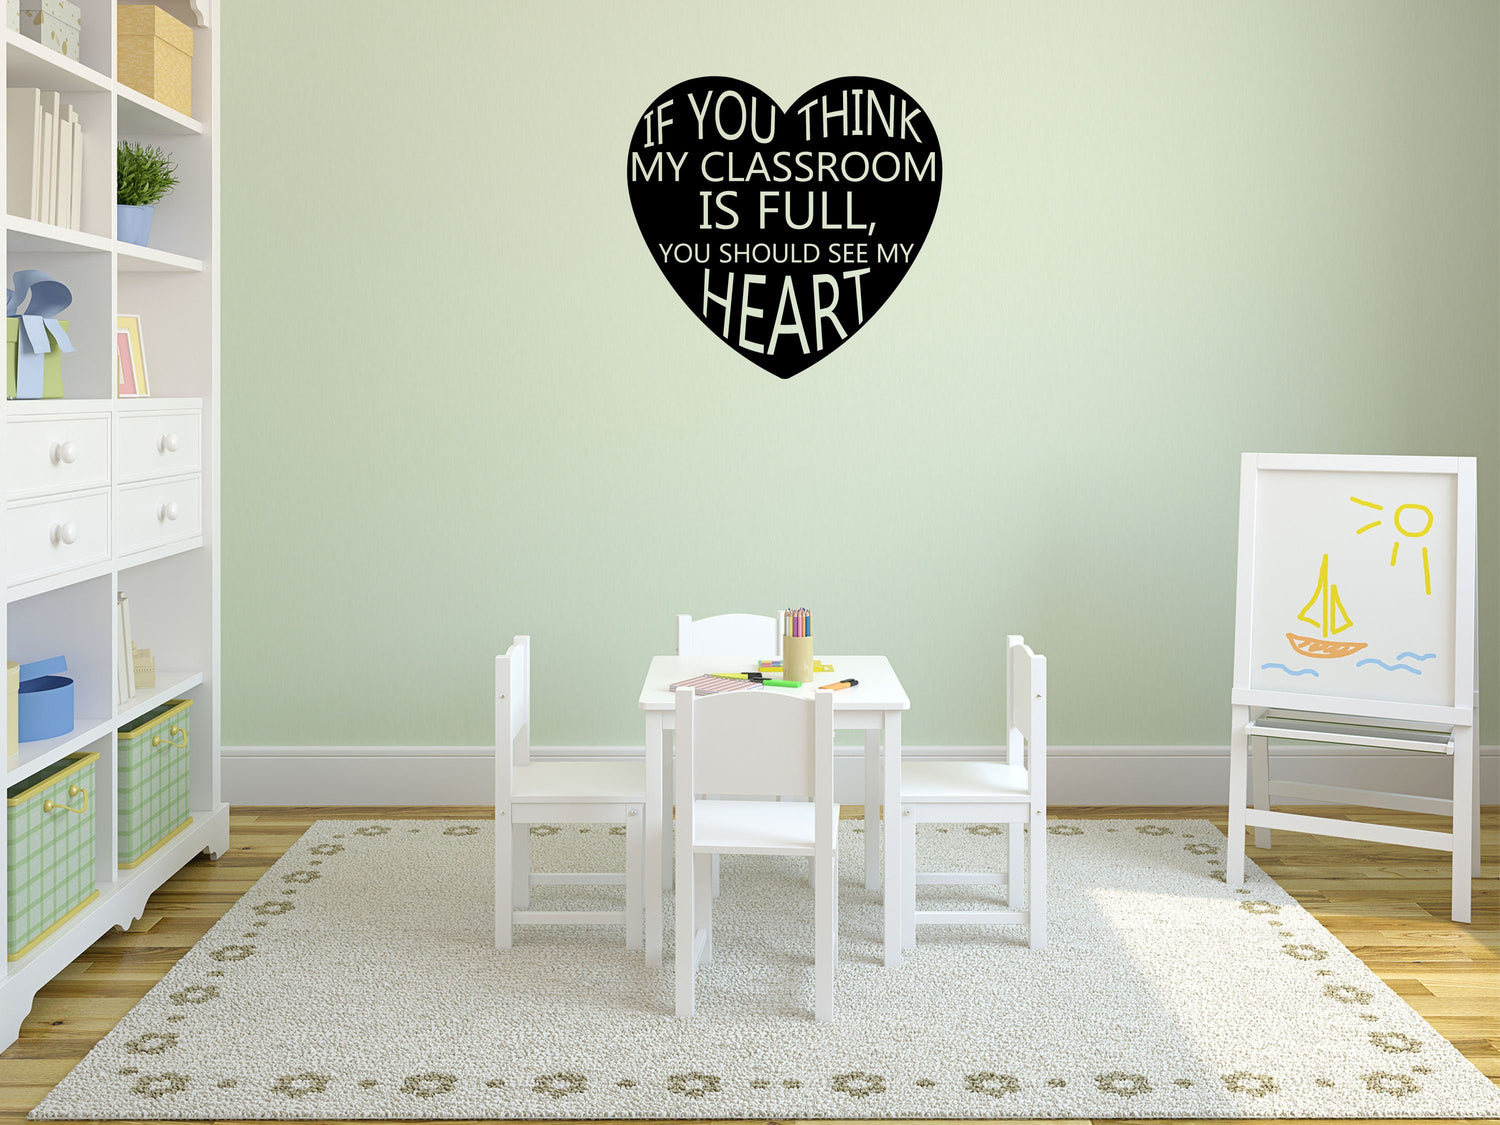 Classroom Decal Office Wall Stickers- Inspirational Wall Decals Vinyl Wall Decal Done 